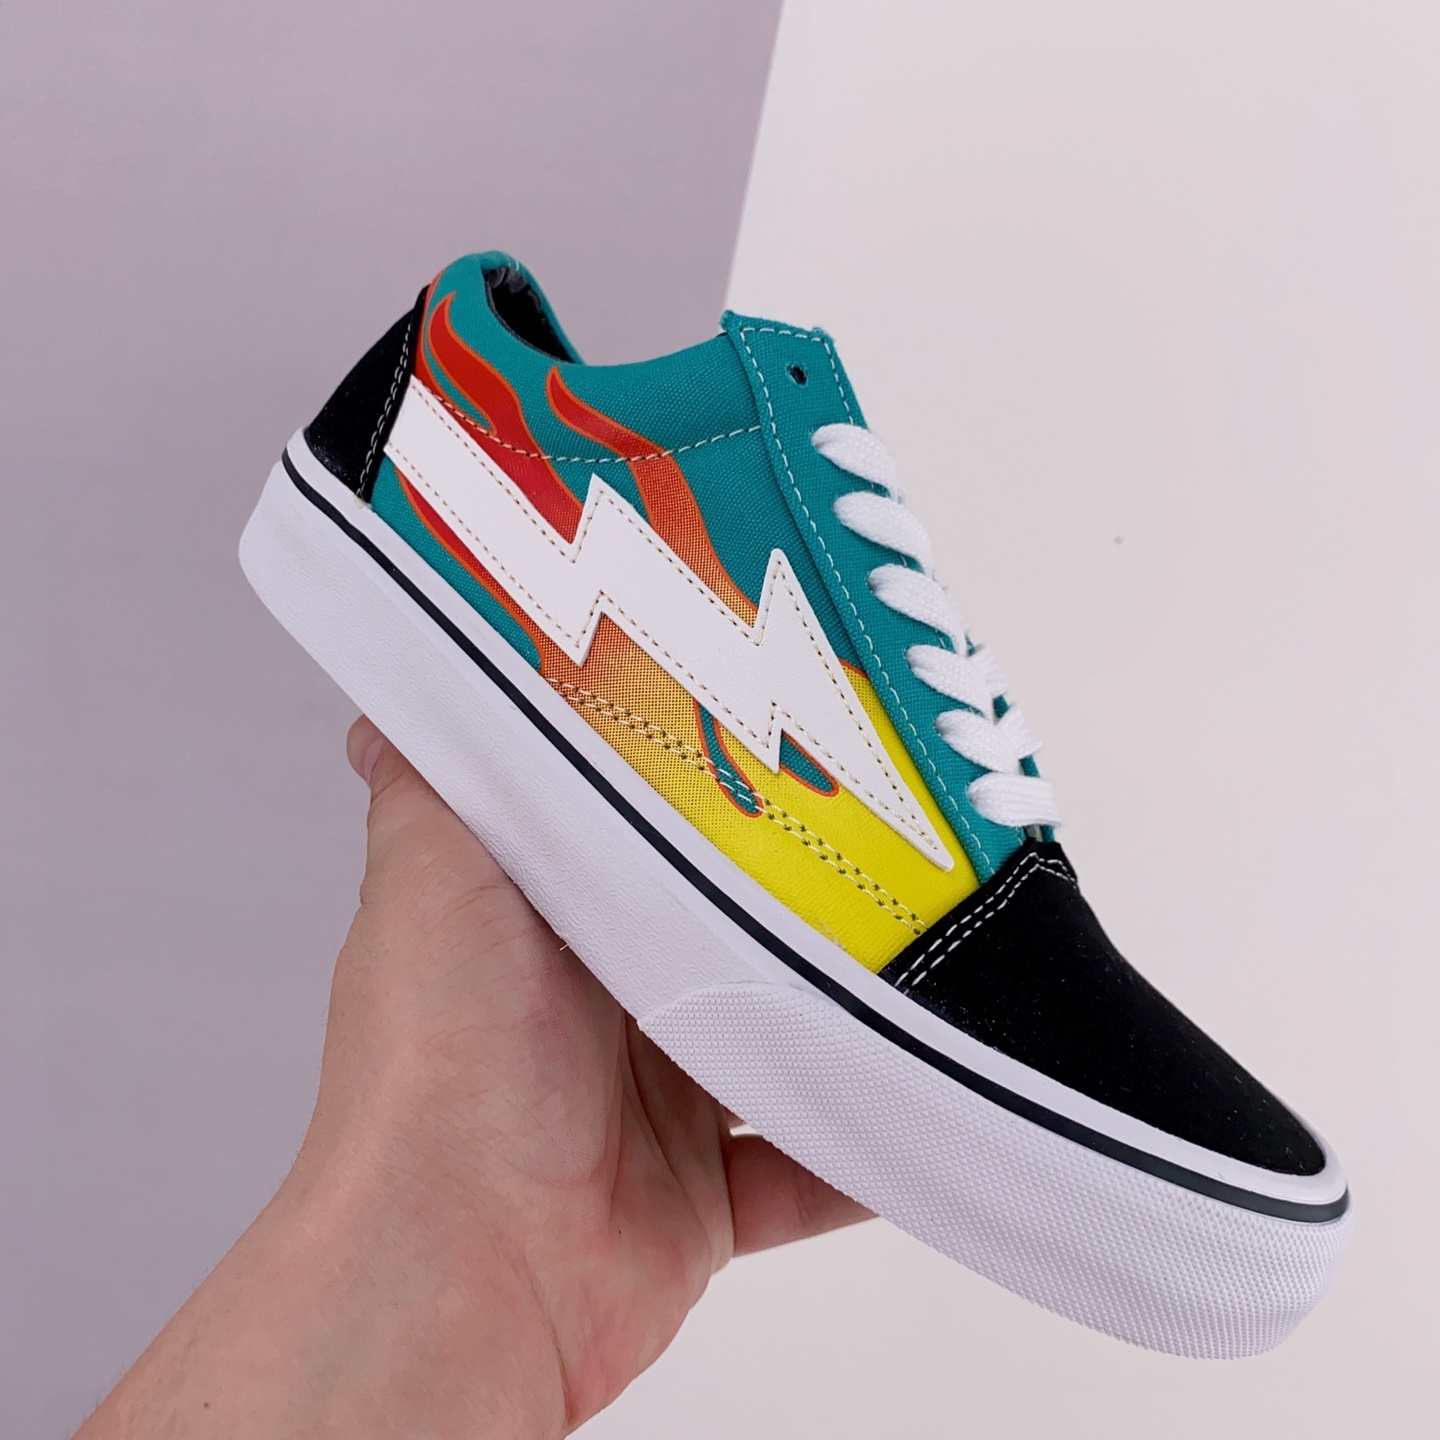 Revenge x Storm Low Top Teal Flame - Trendy Fire-Inspired Skate Shoes